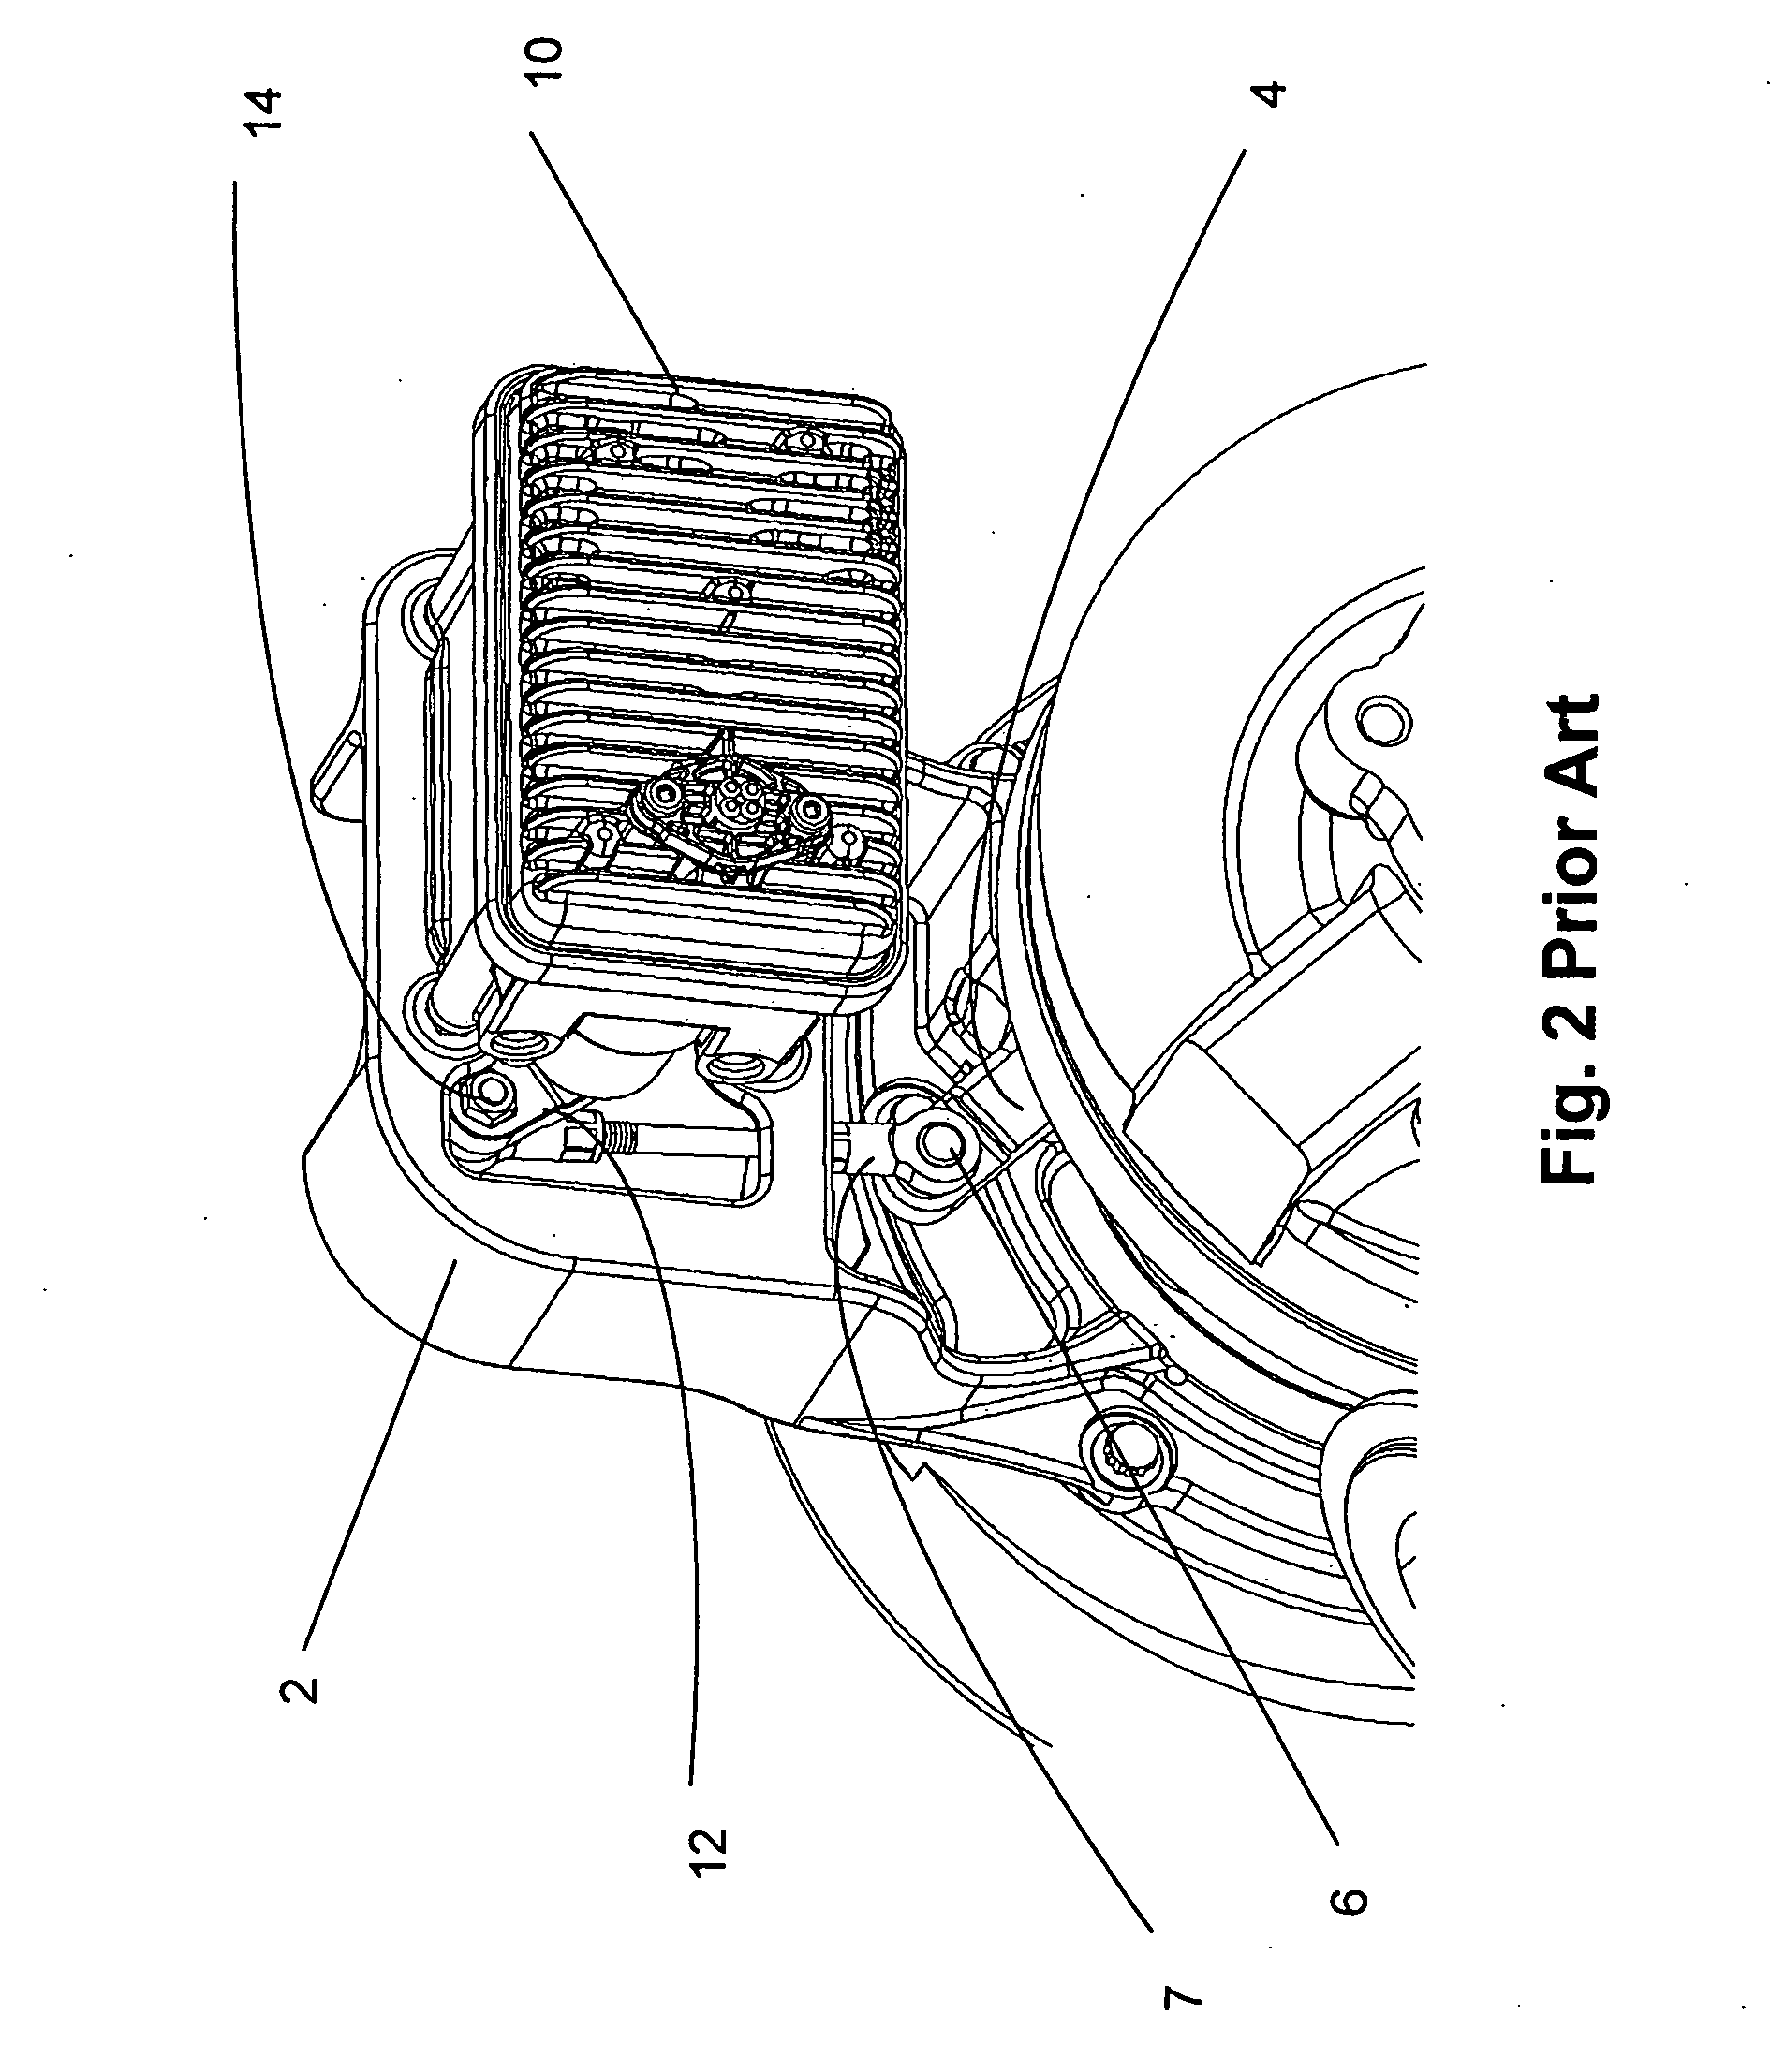 Turbocharger control linkage with reduced heat flow